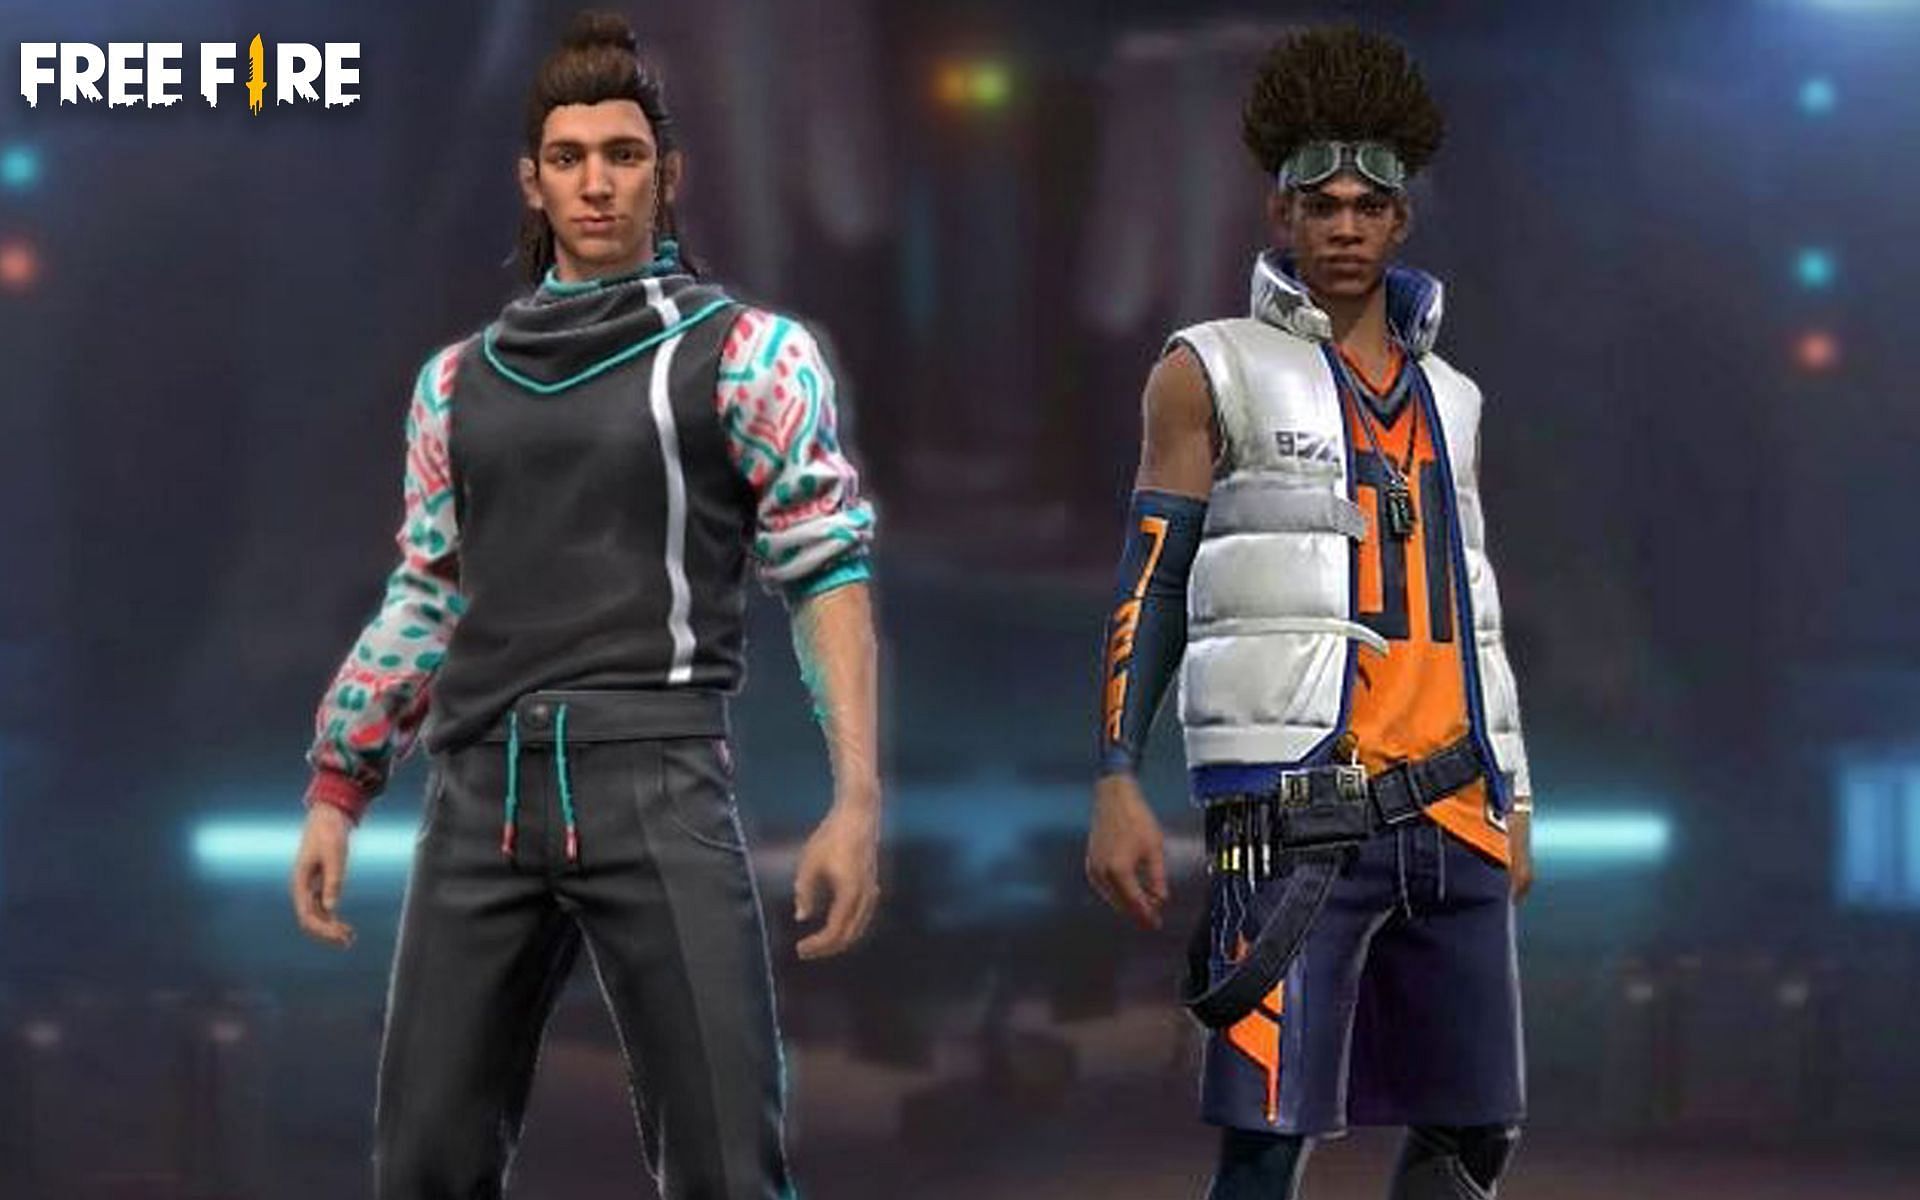 Otho and Leon were added in the OB30 update (Image via SFree Fire)